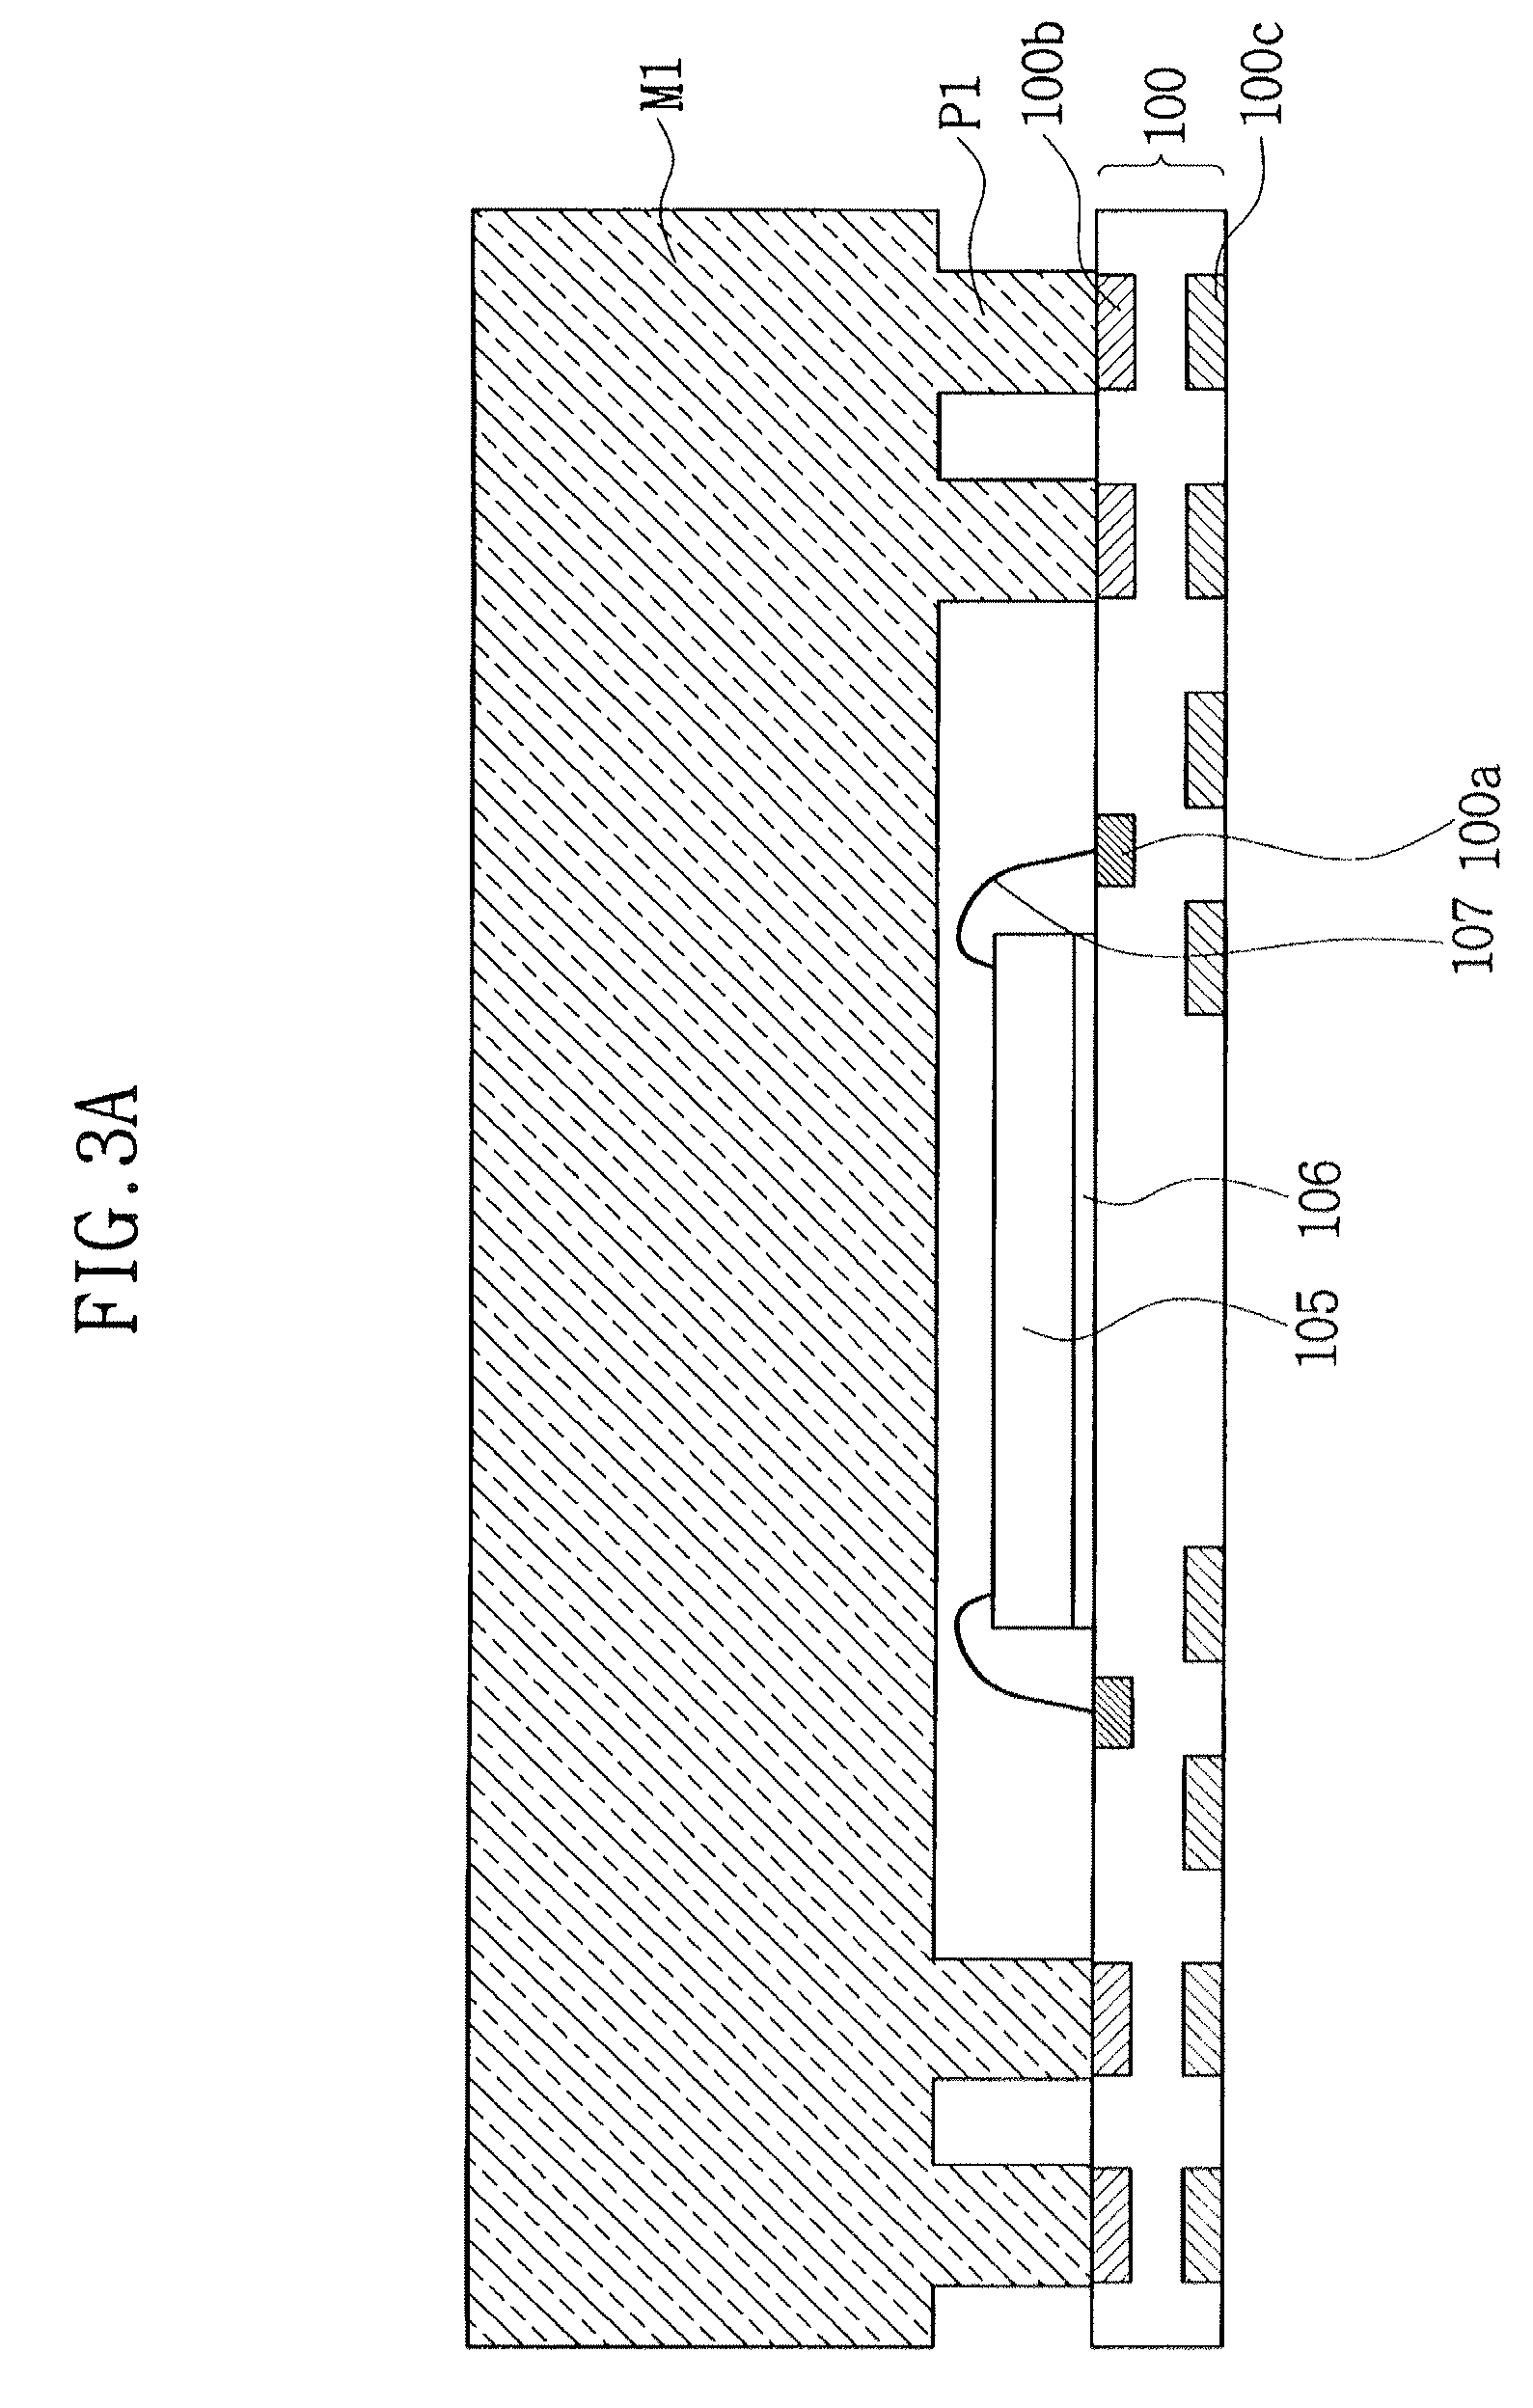 Stack-type semiconductor package, method of forming the same and electronic system including the same